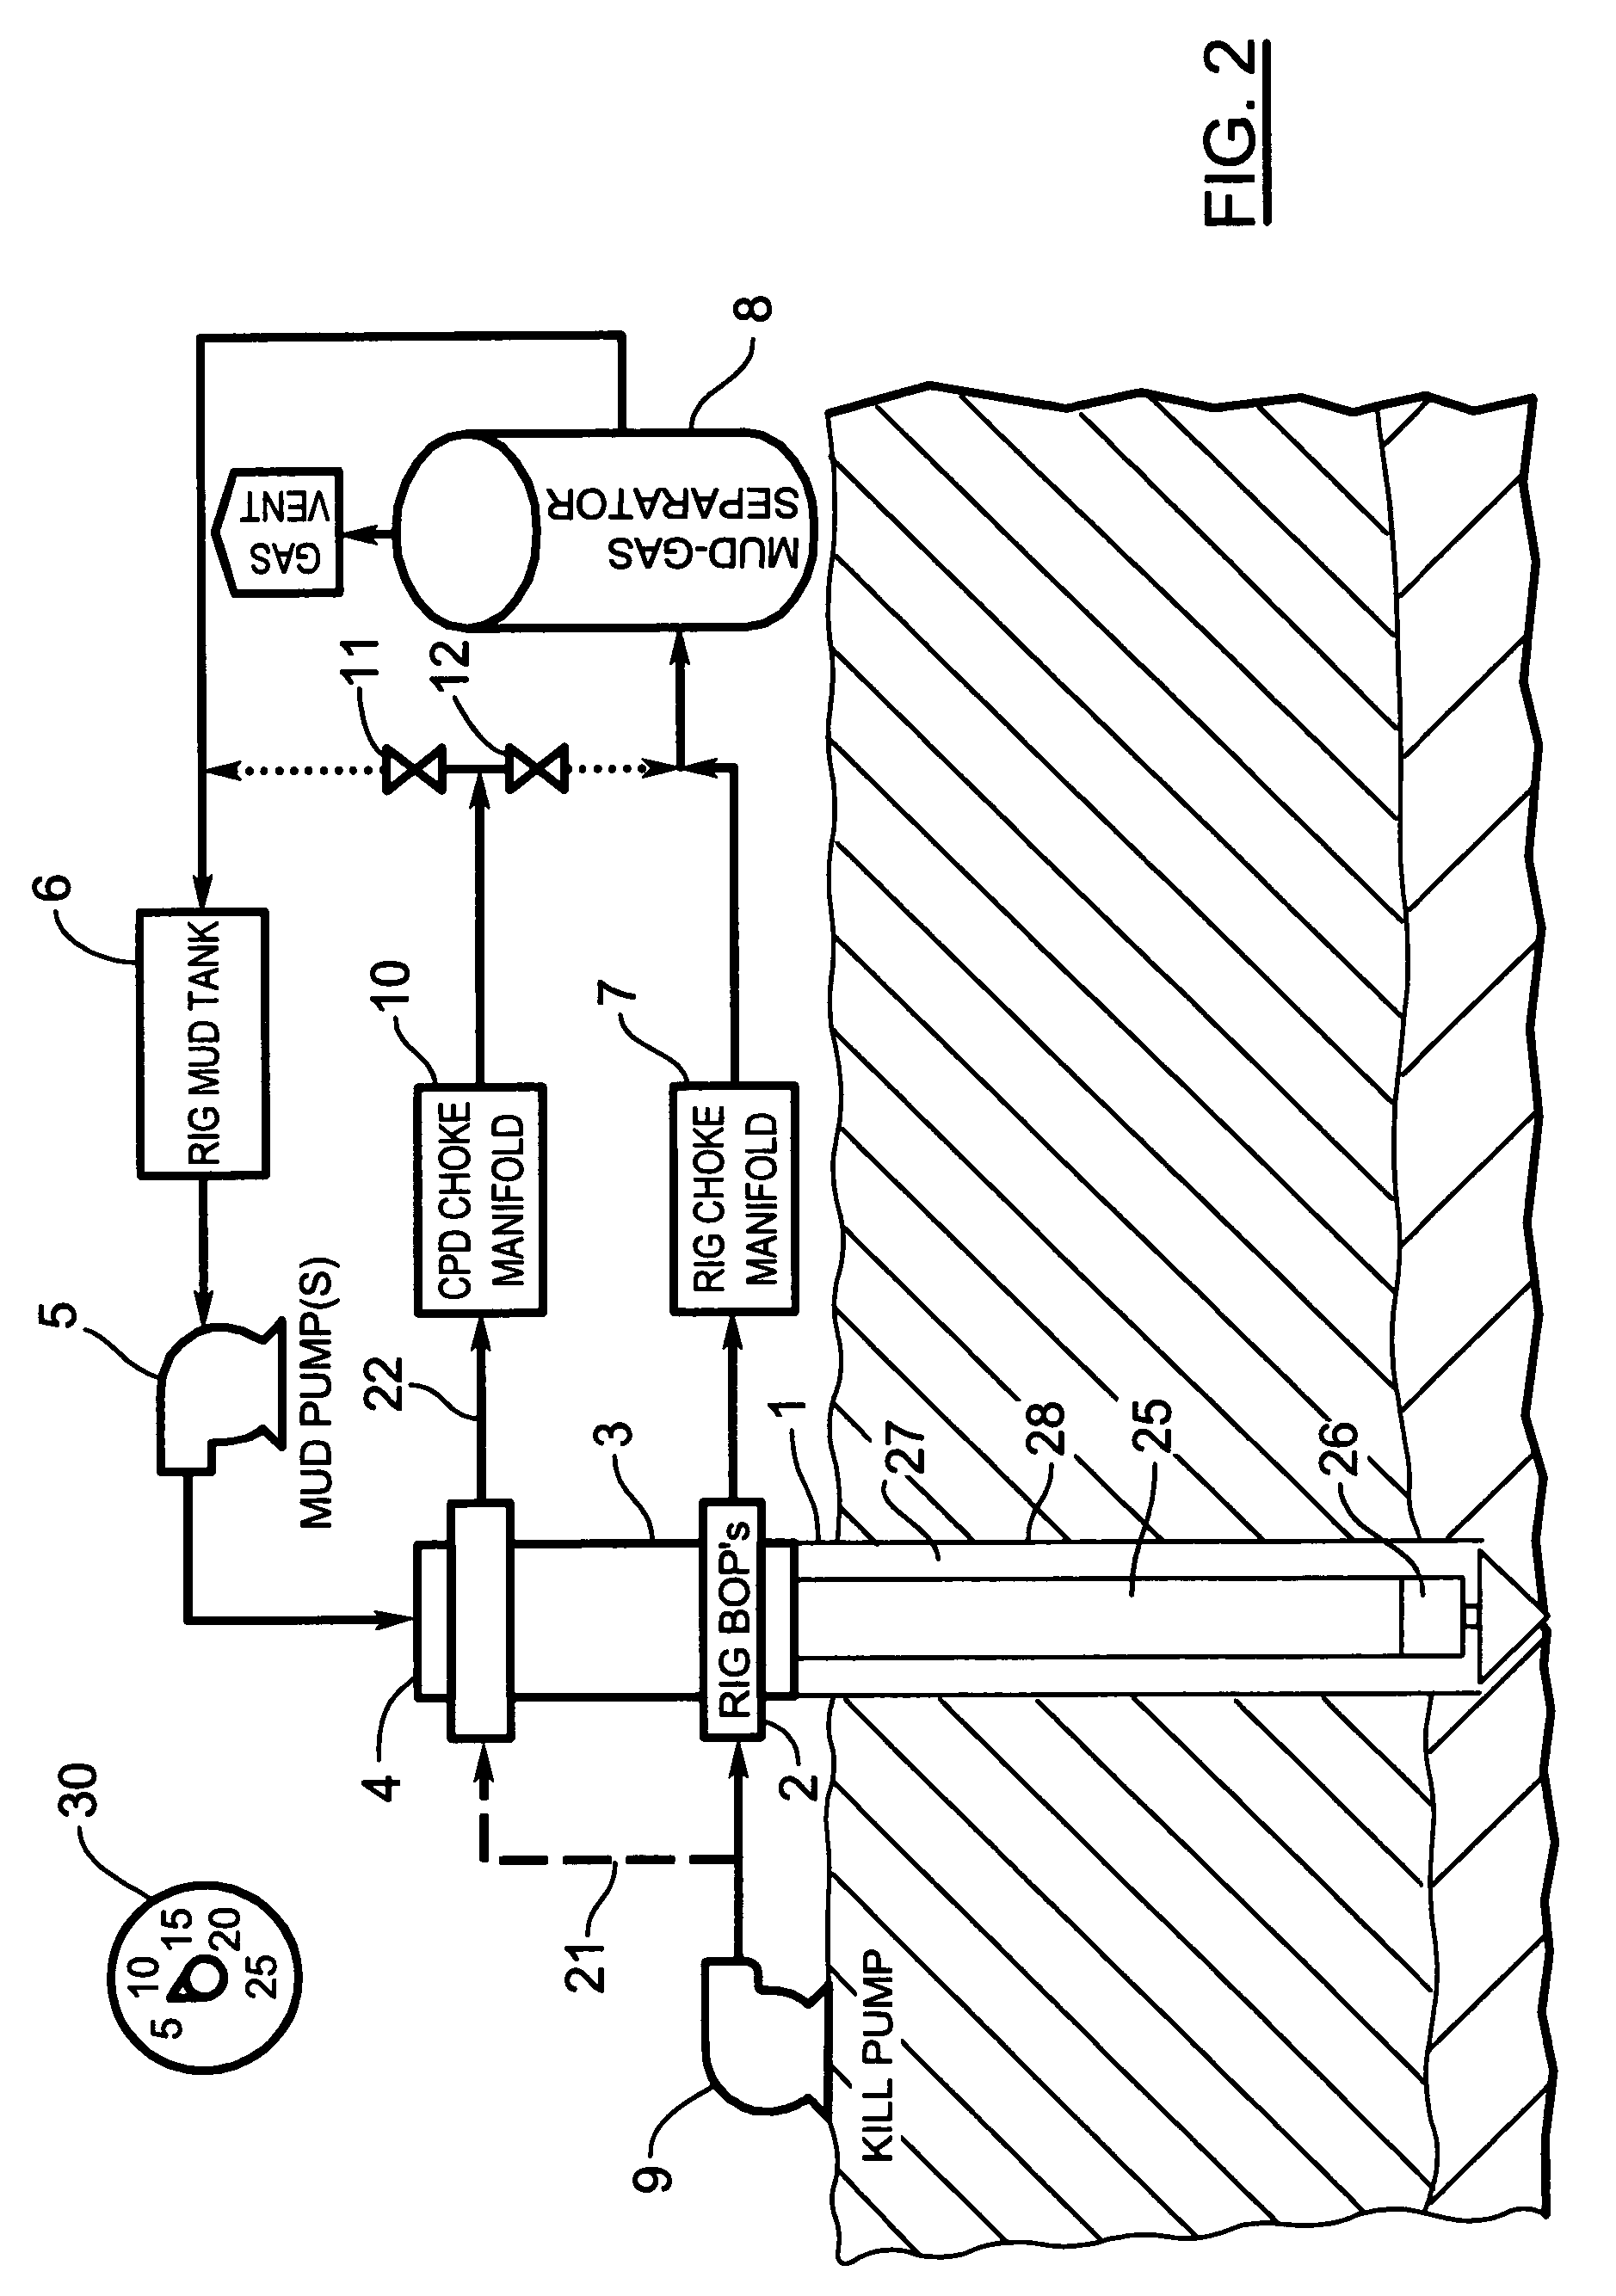 Method of dynamically controlling open hole pressure in a wellbore using wellhead pressure control